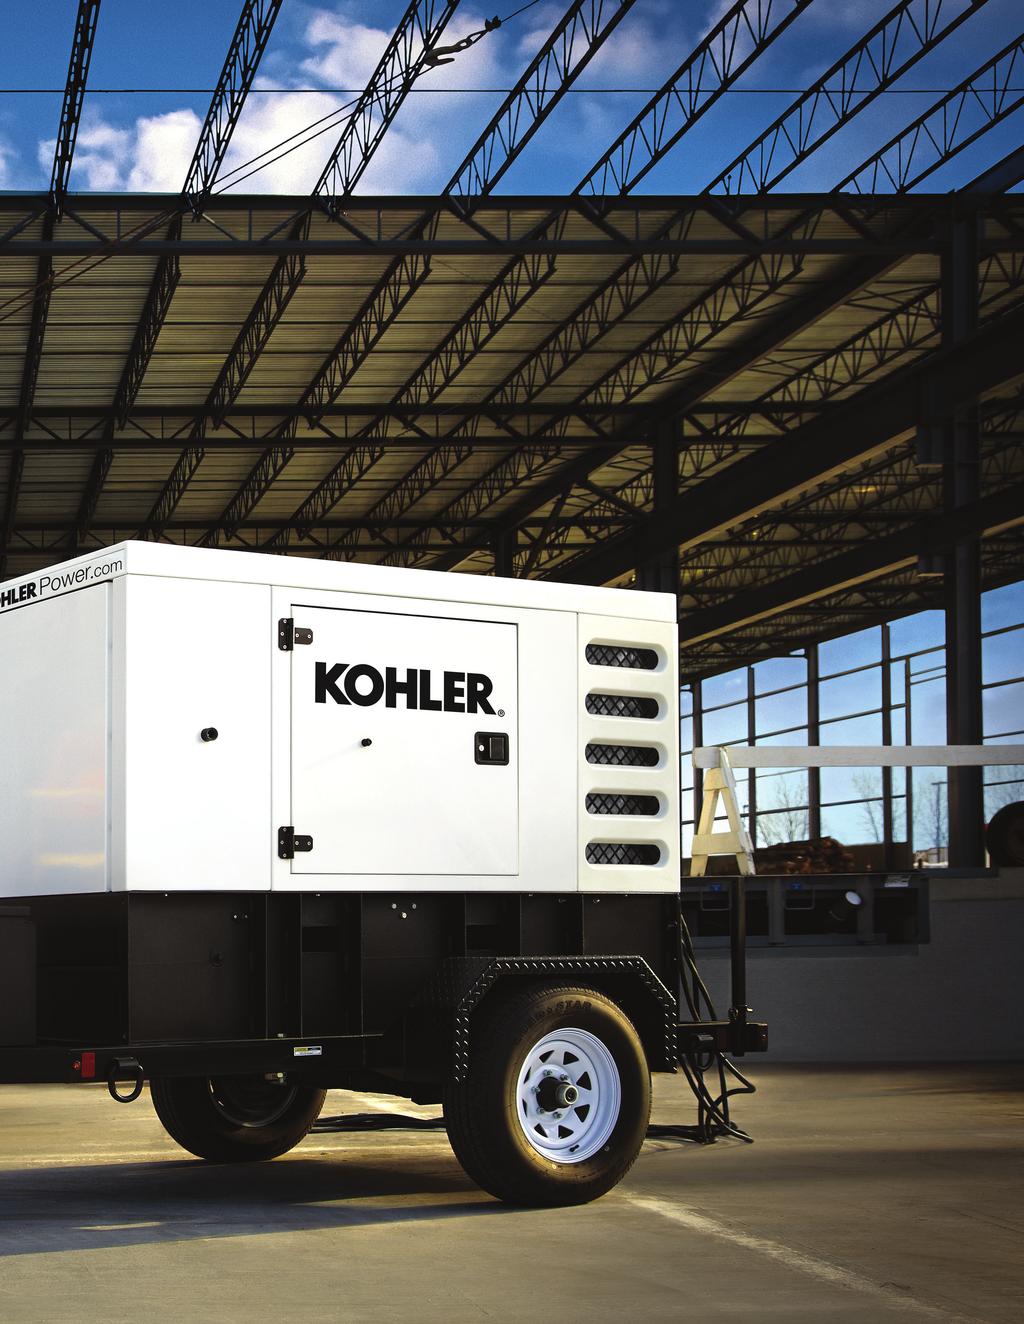 TOUGH TO THE CORE. GOES ANYWHERE YOU WANT. Quiet, reliable KOHLER mobile generators give you dependable power anywhere, from remote construction sites to public events to storm recovery.